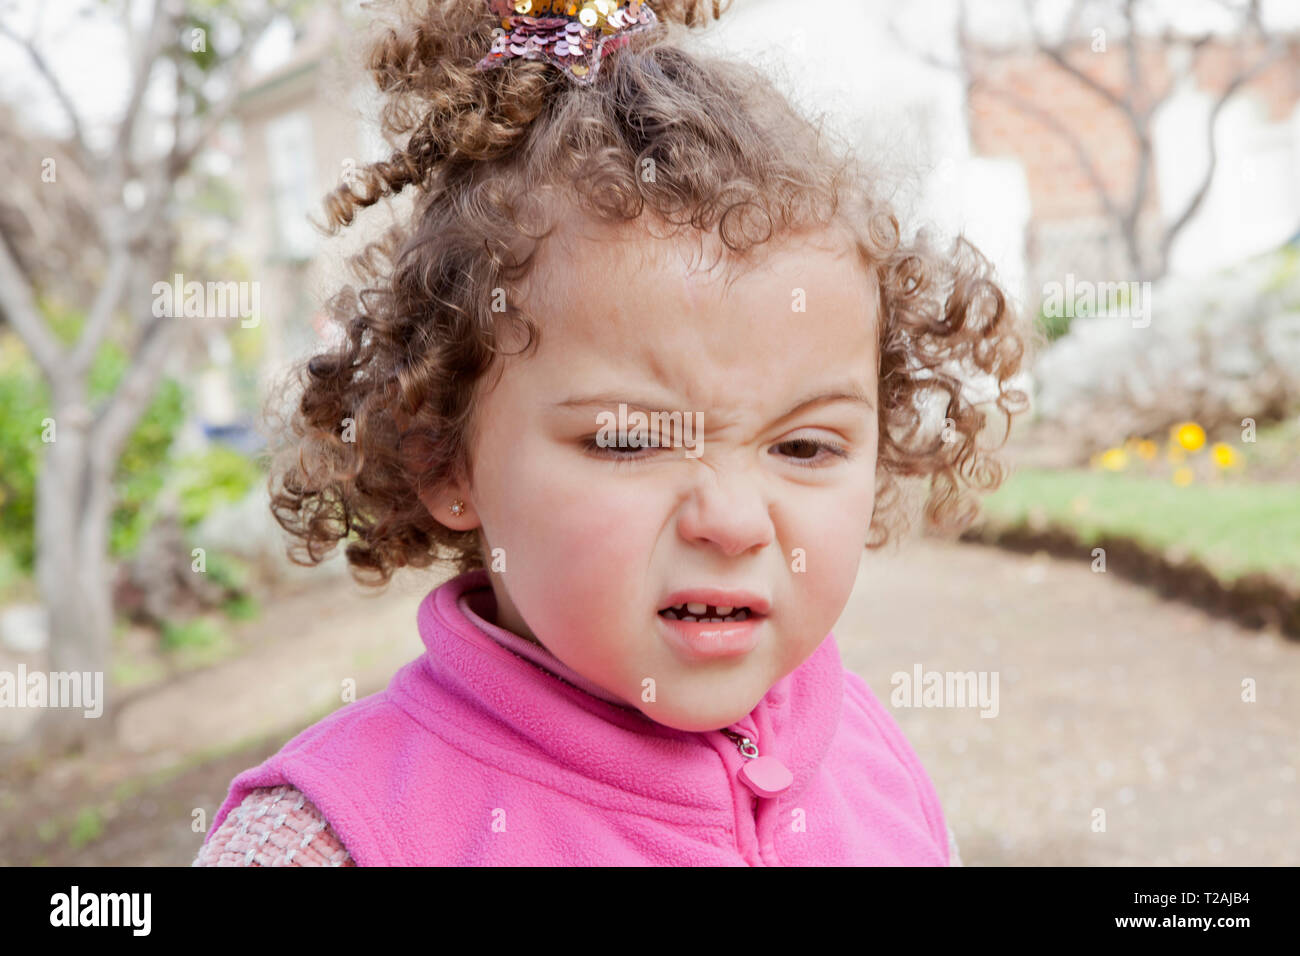 Girl with disgusted expression Stock Photo